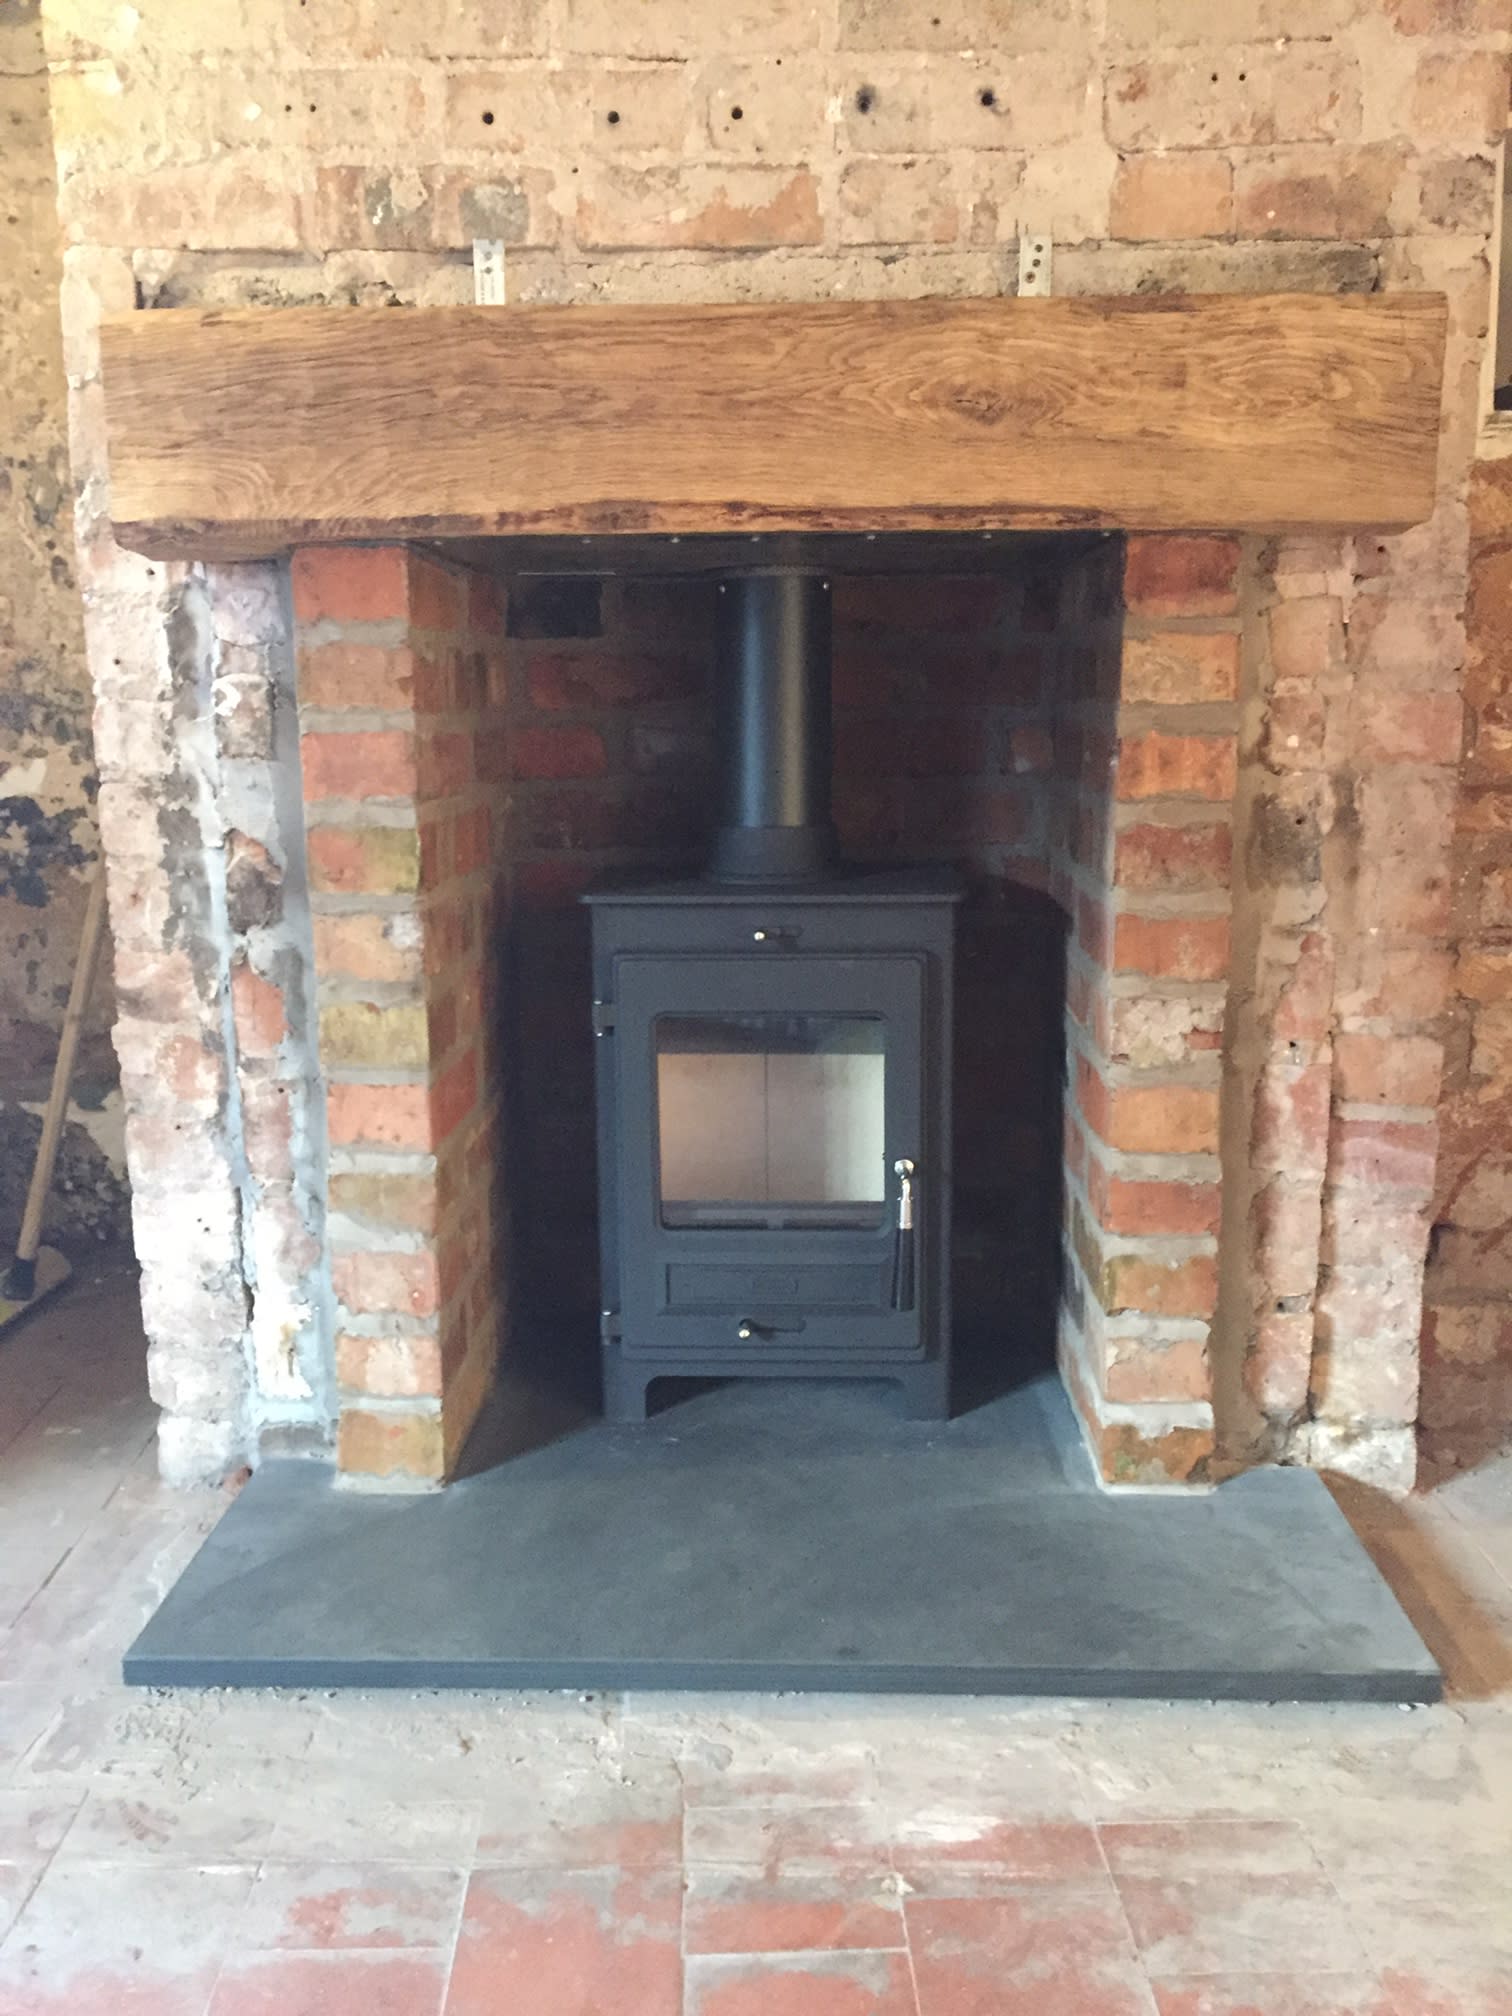 Chimney Sweep Fireplaces & Stoves Stoke-On-Trent 07415 283865